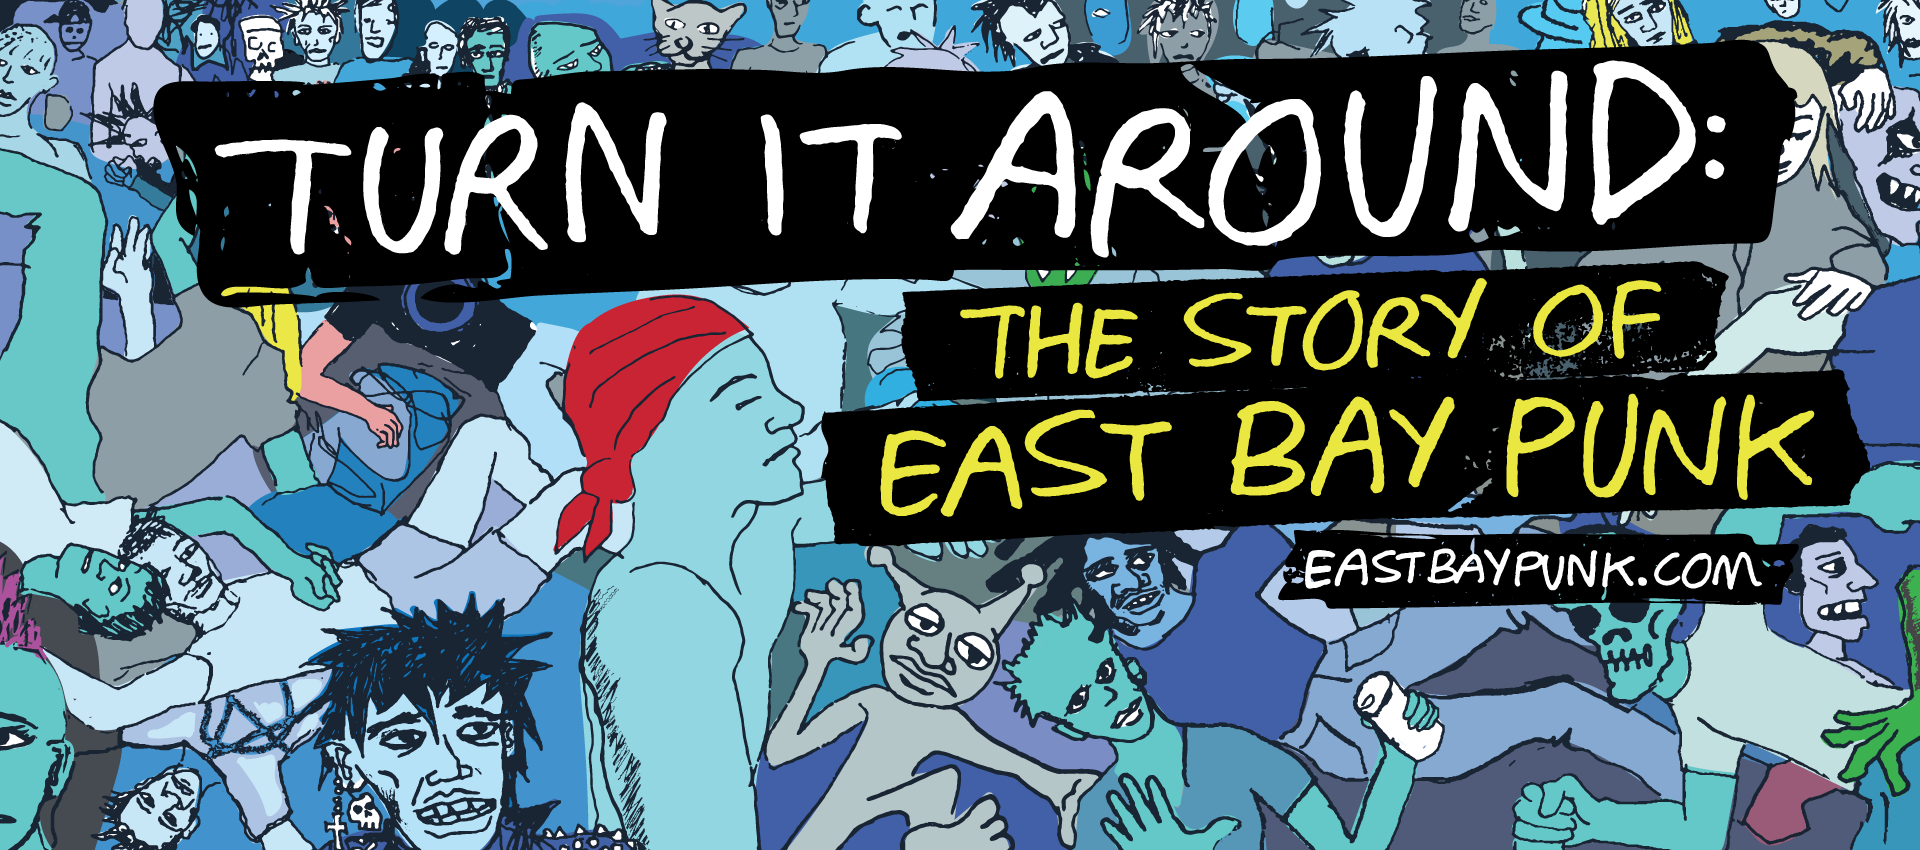 Turn It Around: The Story of East Bay Punk Documentary